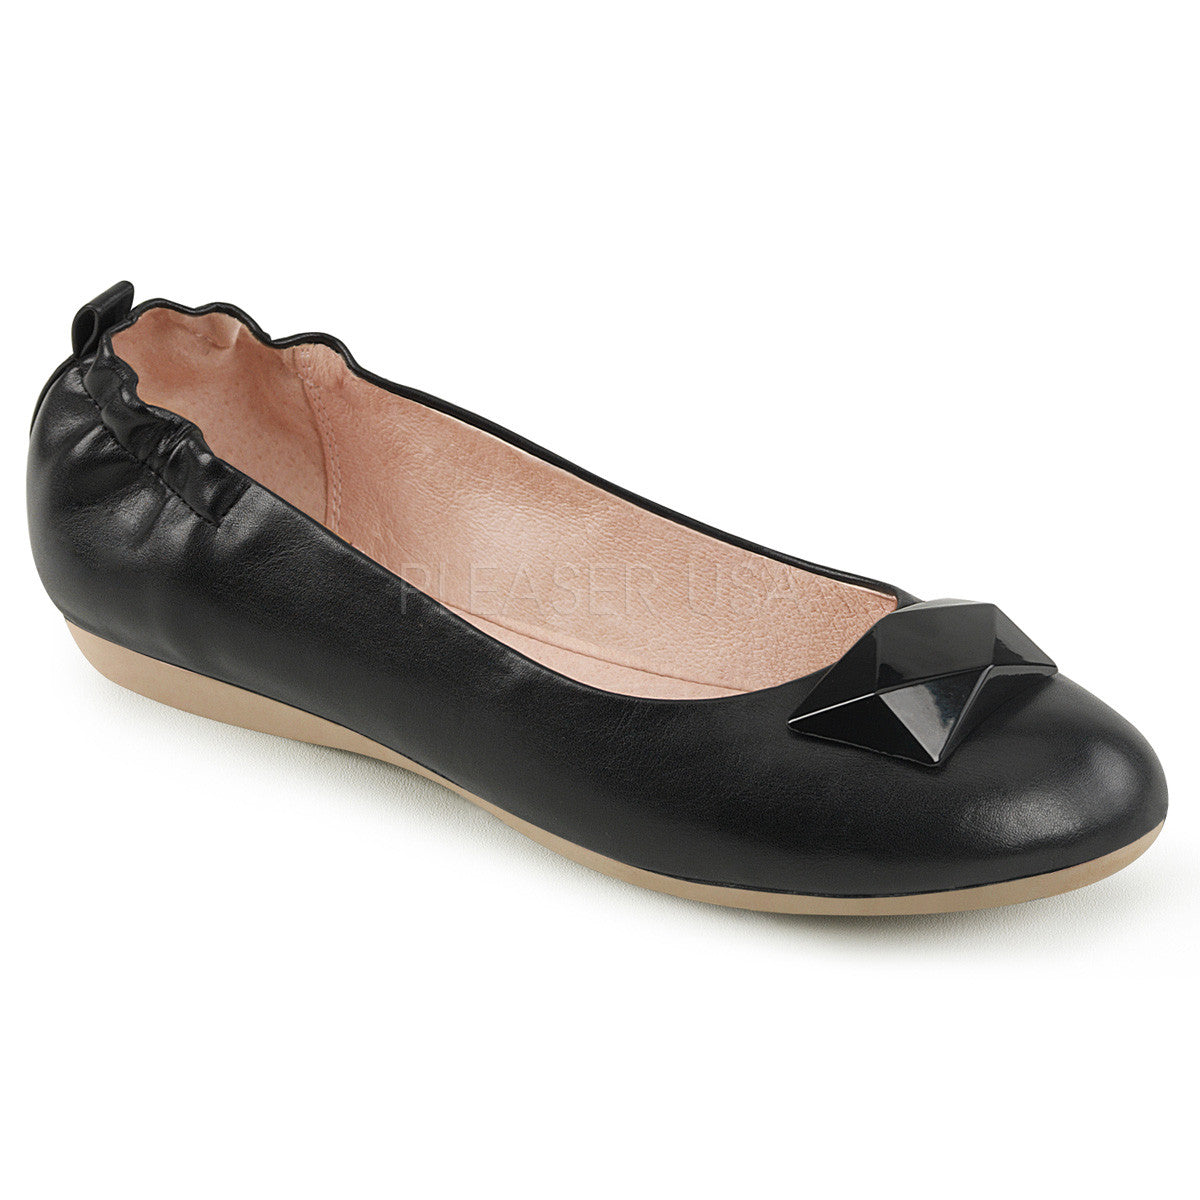 Round Toe Foldable Ballet Flats With Elasticated Heel and Geometric Adornment At Toe|Pin Up Couture OLIVE-08 Black Pu